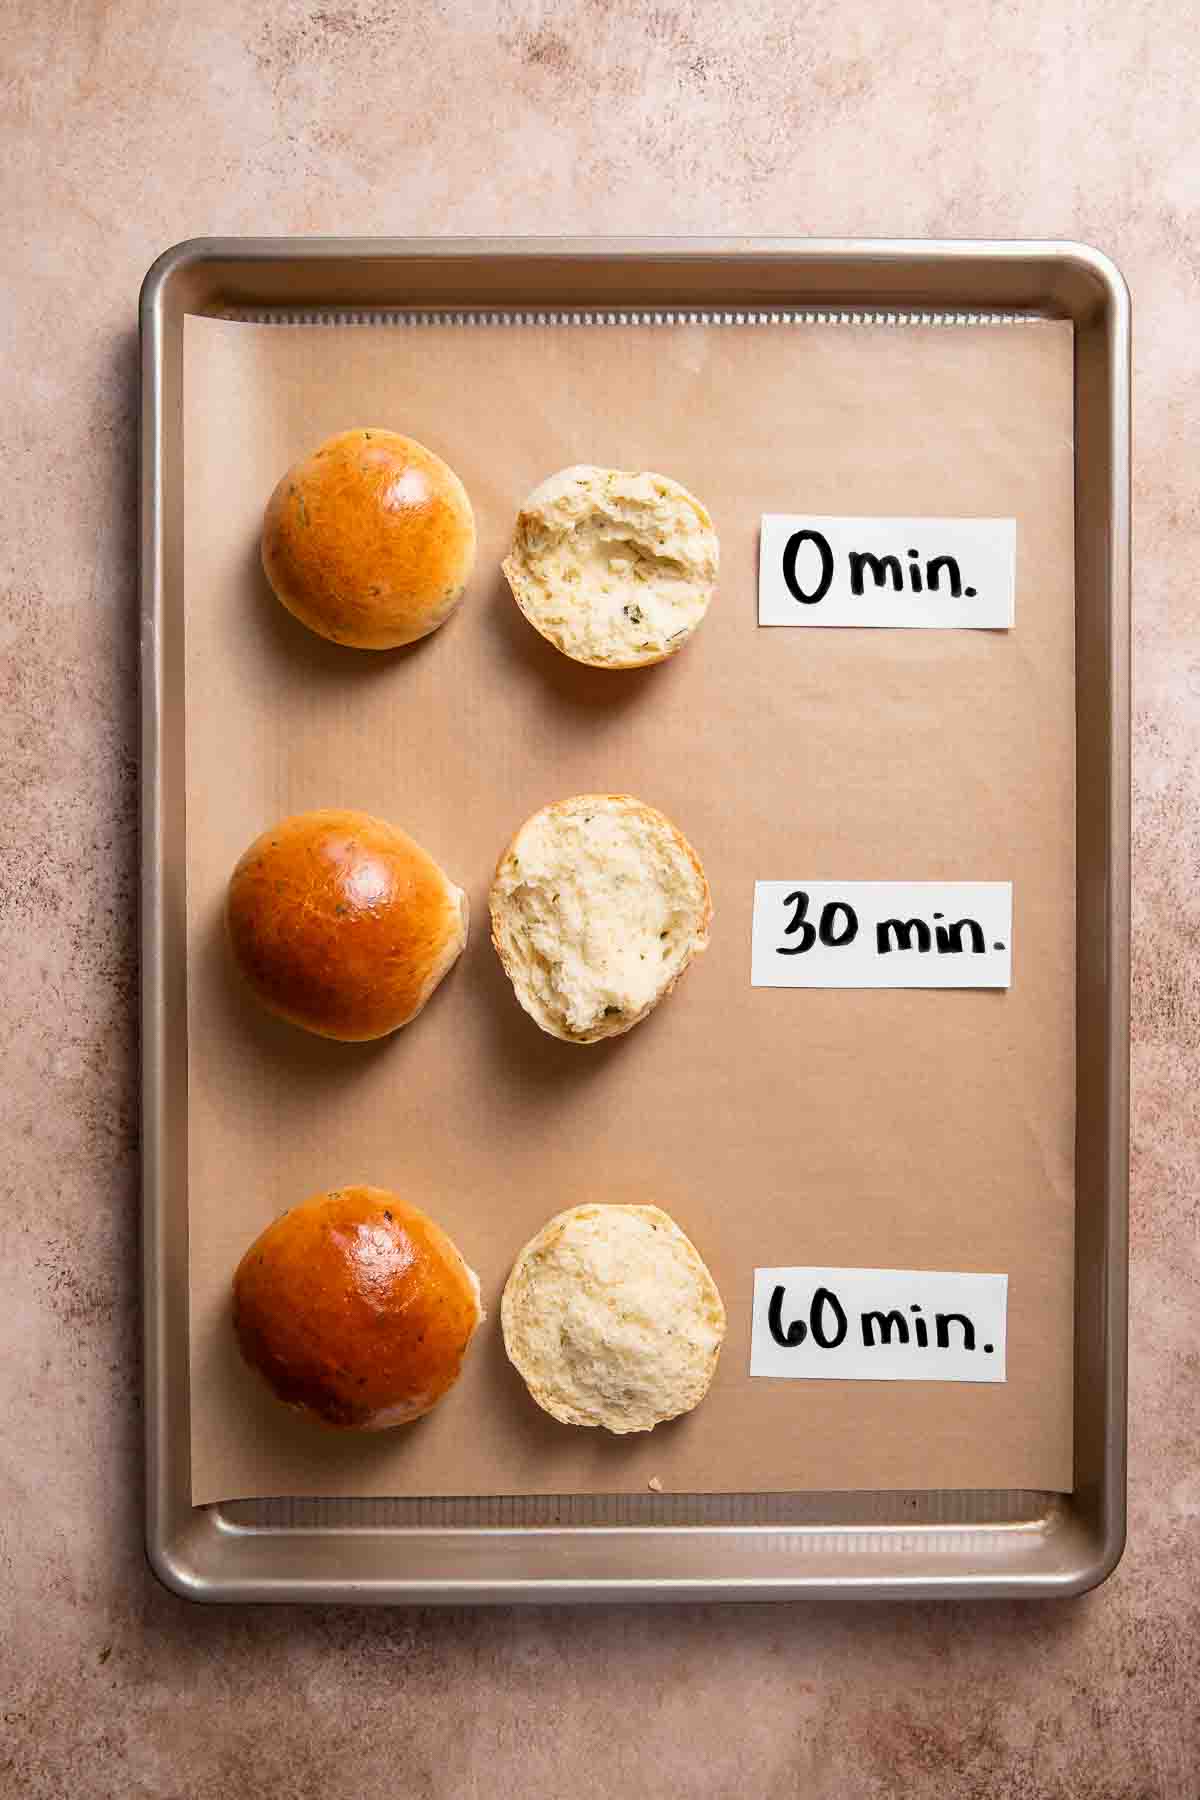 A baking pan with three different bread rolls labeled with how much time they risen before baking.